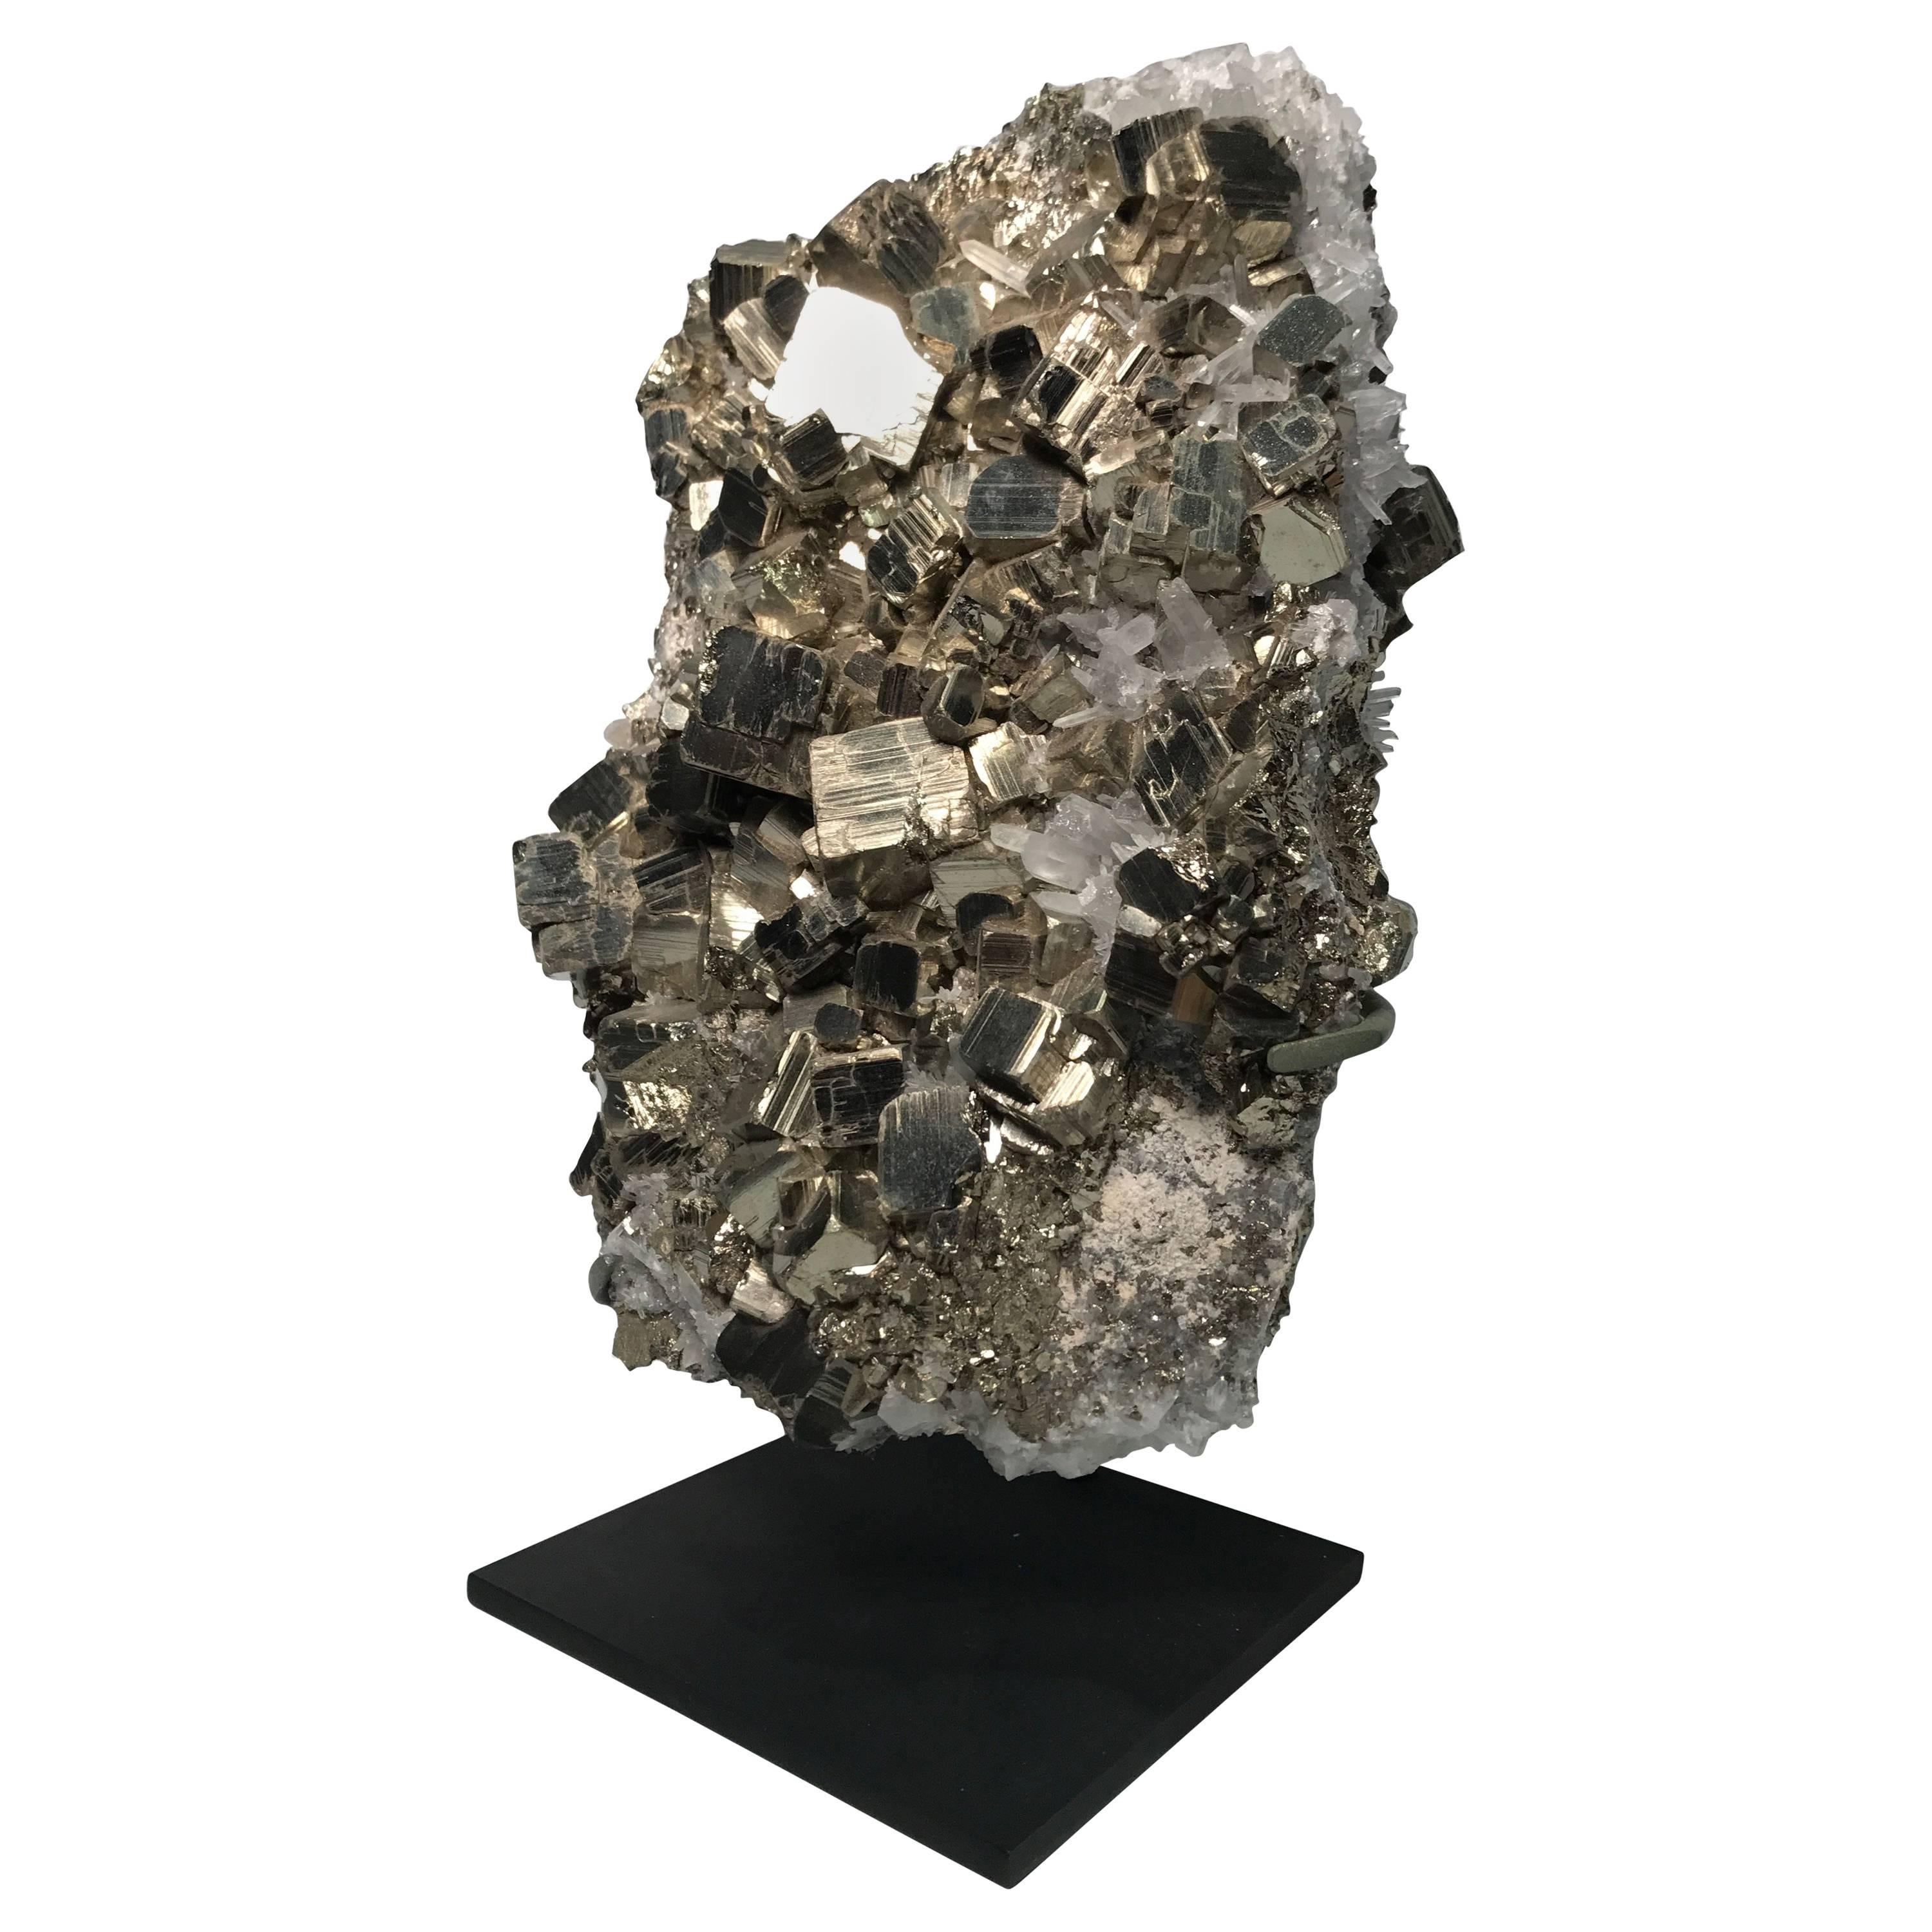 Mounted Pyrite Mineral Specimen "Fools Gold" with Quartz Inclusions from Peru